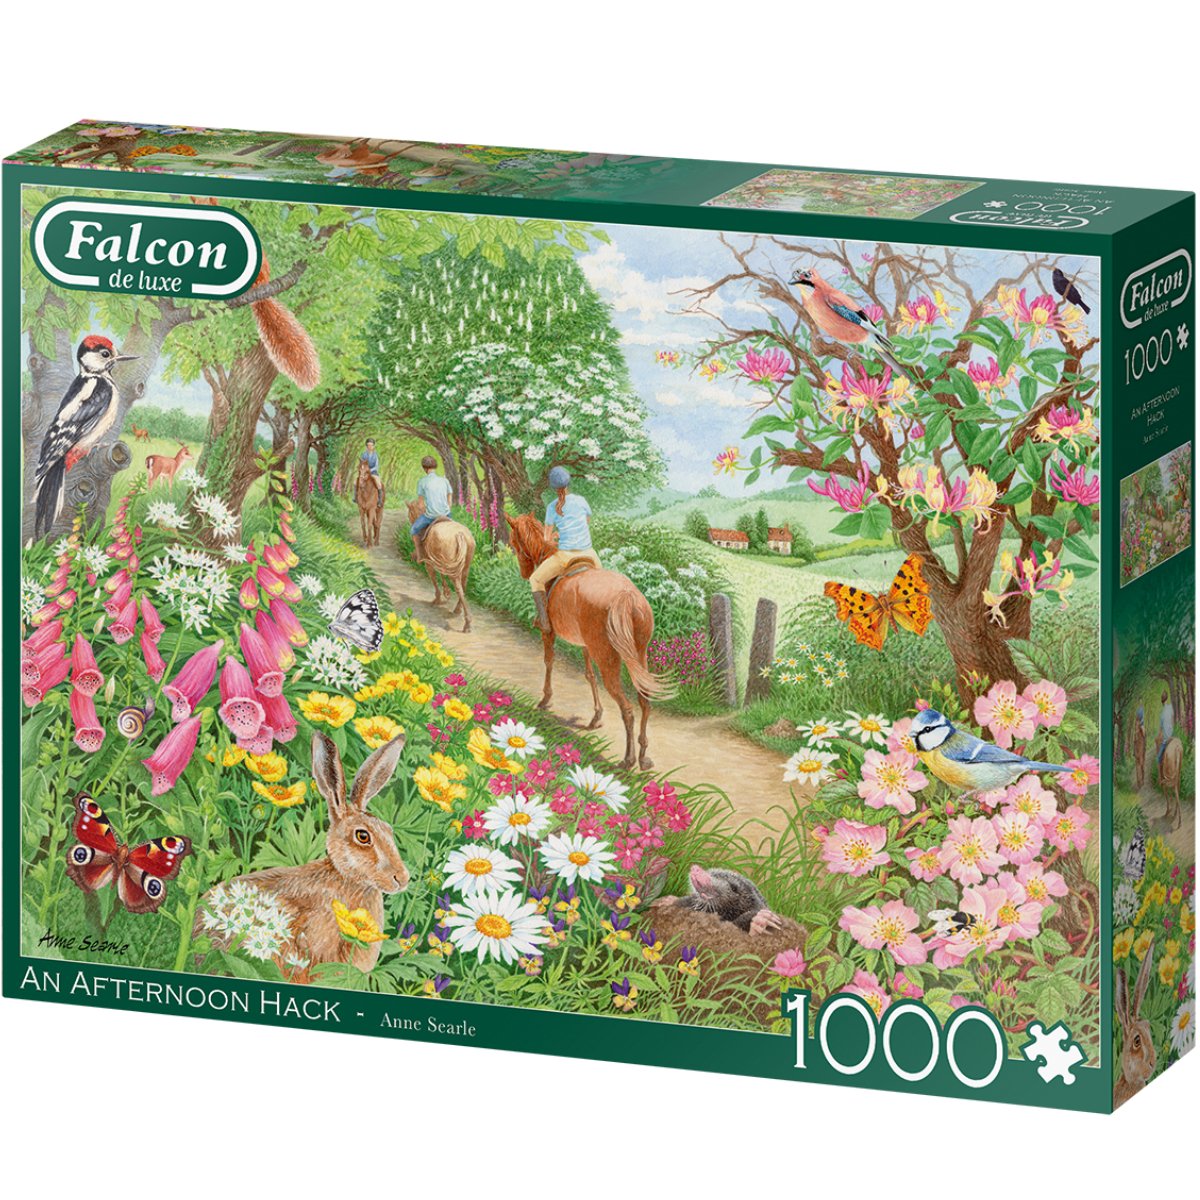 Falcon An Afternoon Hack Jigsaw Puzzle (1000 Pieces) - Phillips Hobbies